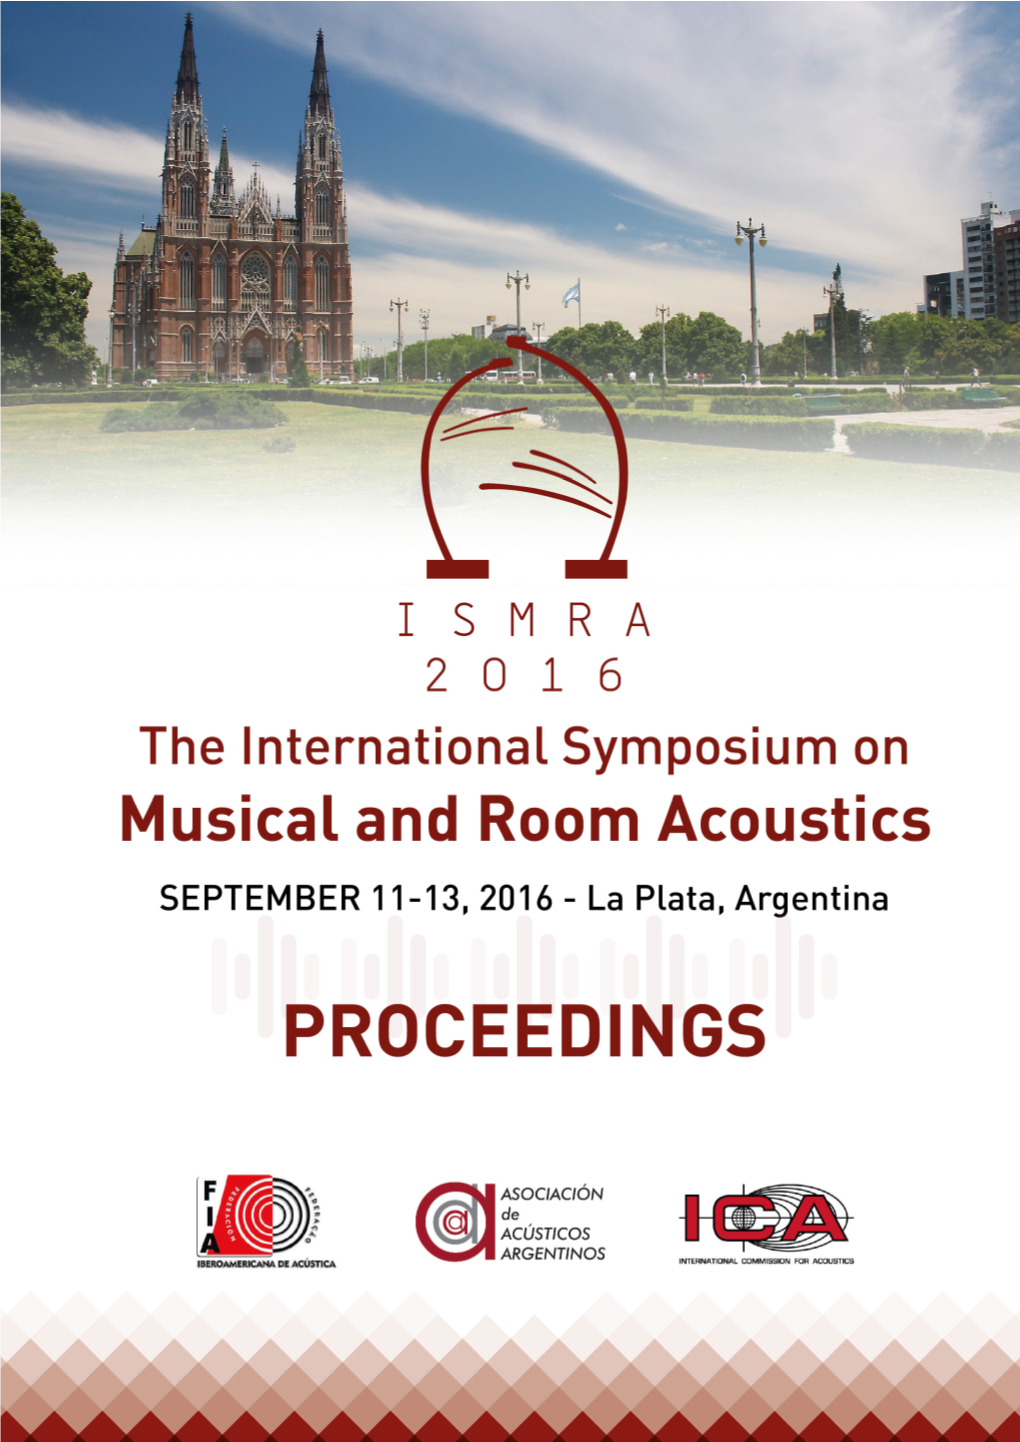 The International Symposium on Musical and Room Acoustics